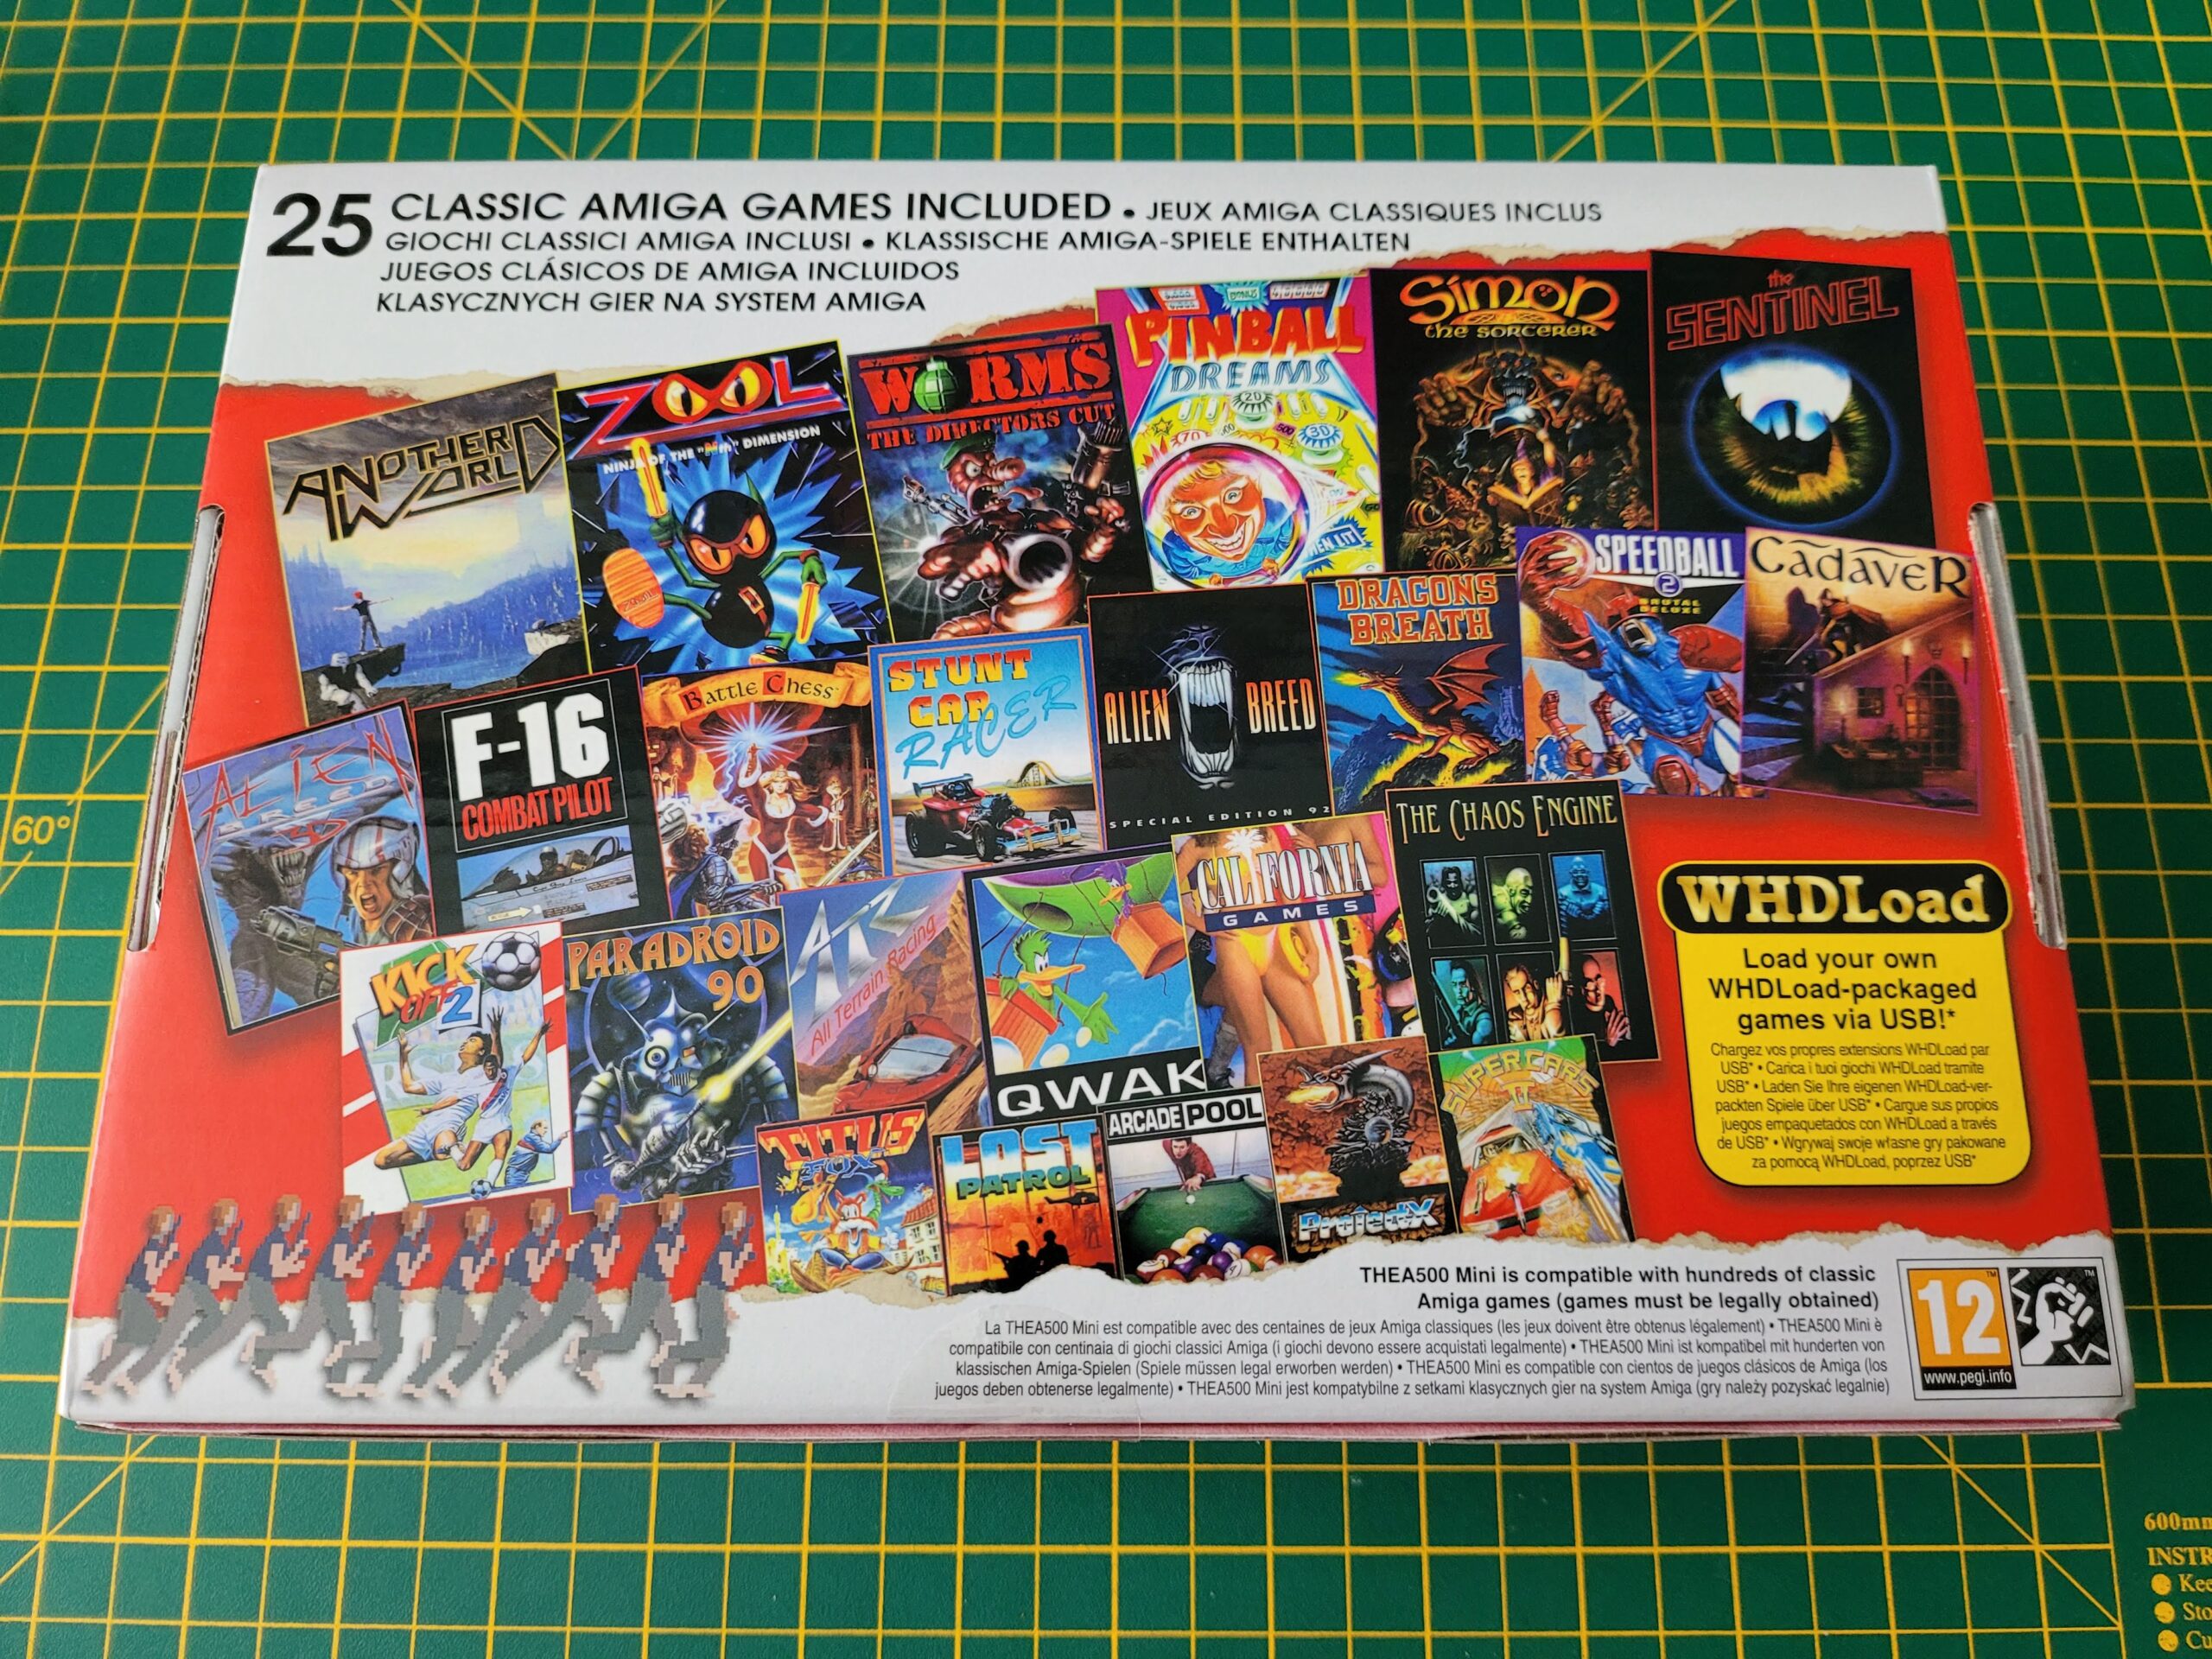 A500 Mini review: a great intro to the world of Commodore Amiga